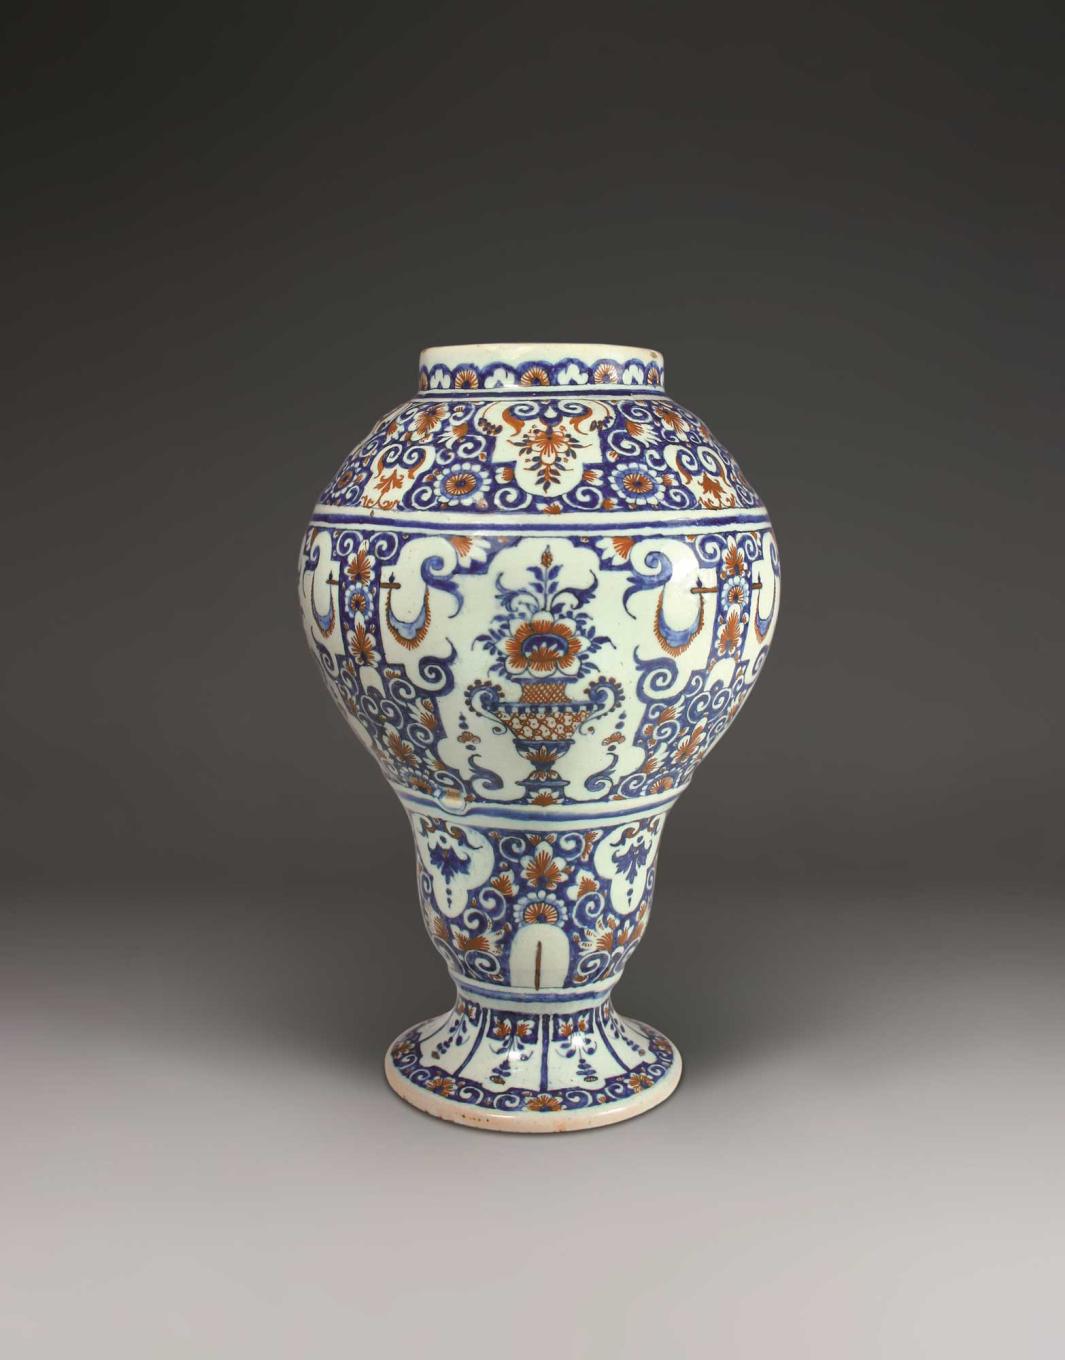 Earthenware vase with a floral motif in blue and orange.